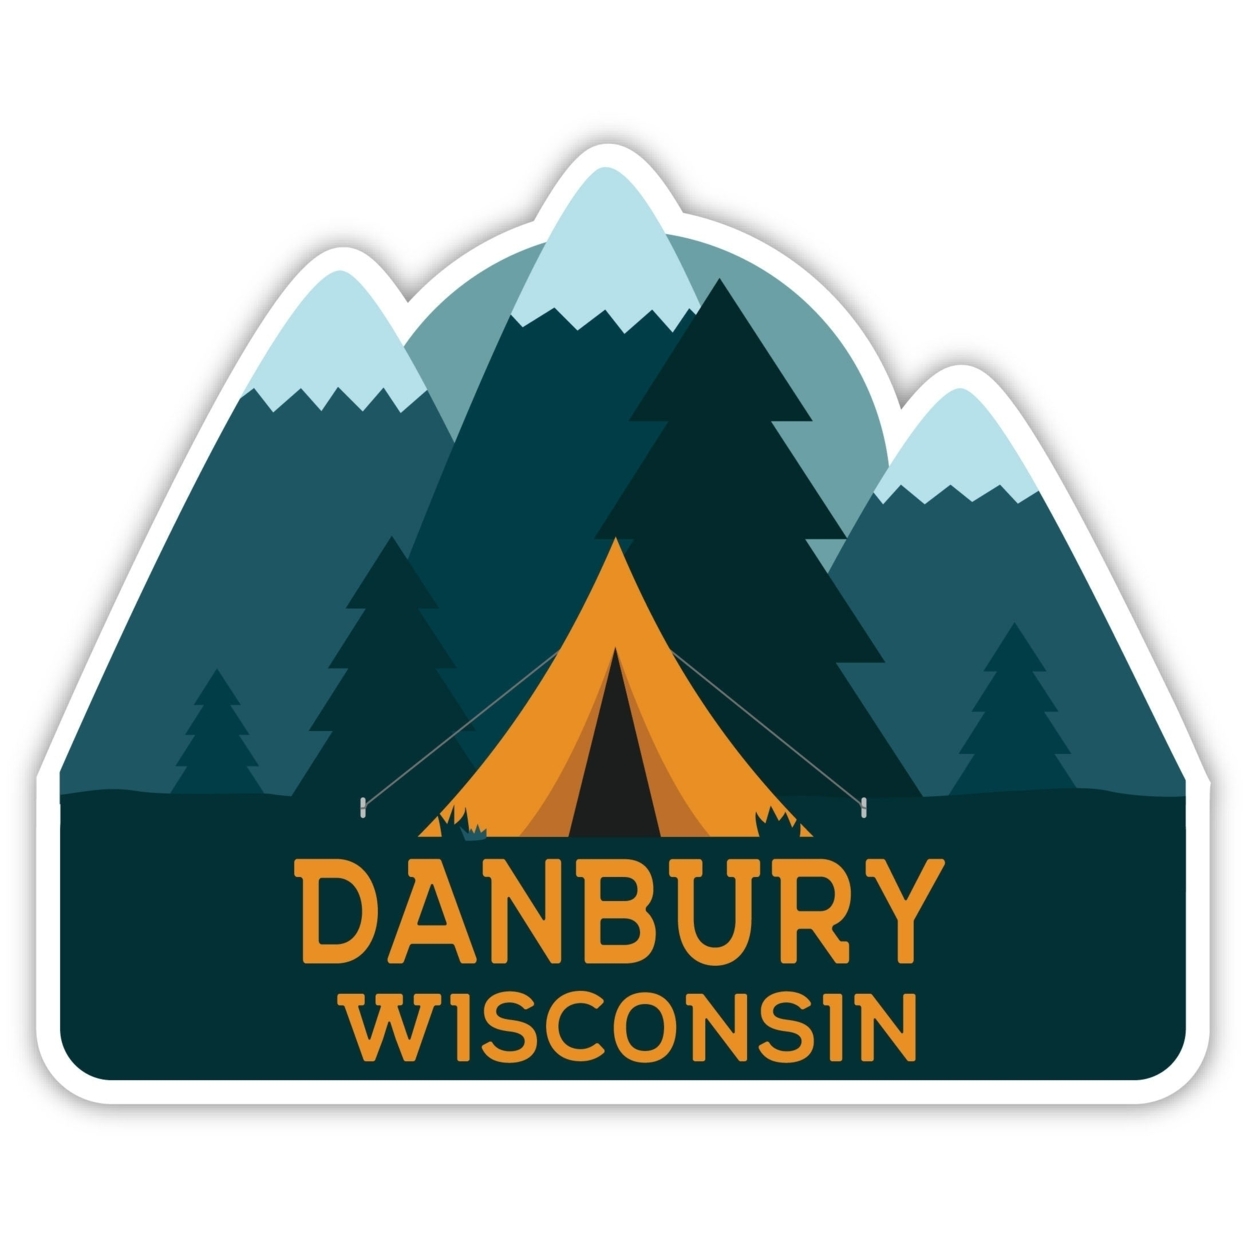 Danbury Wisconsin Souvenir Decorative Stickers (Choose Theme And Size) - 4-Pack, 4-Inch, Tent